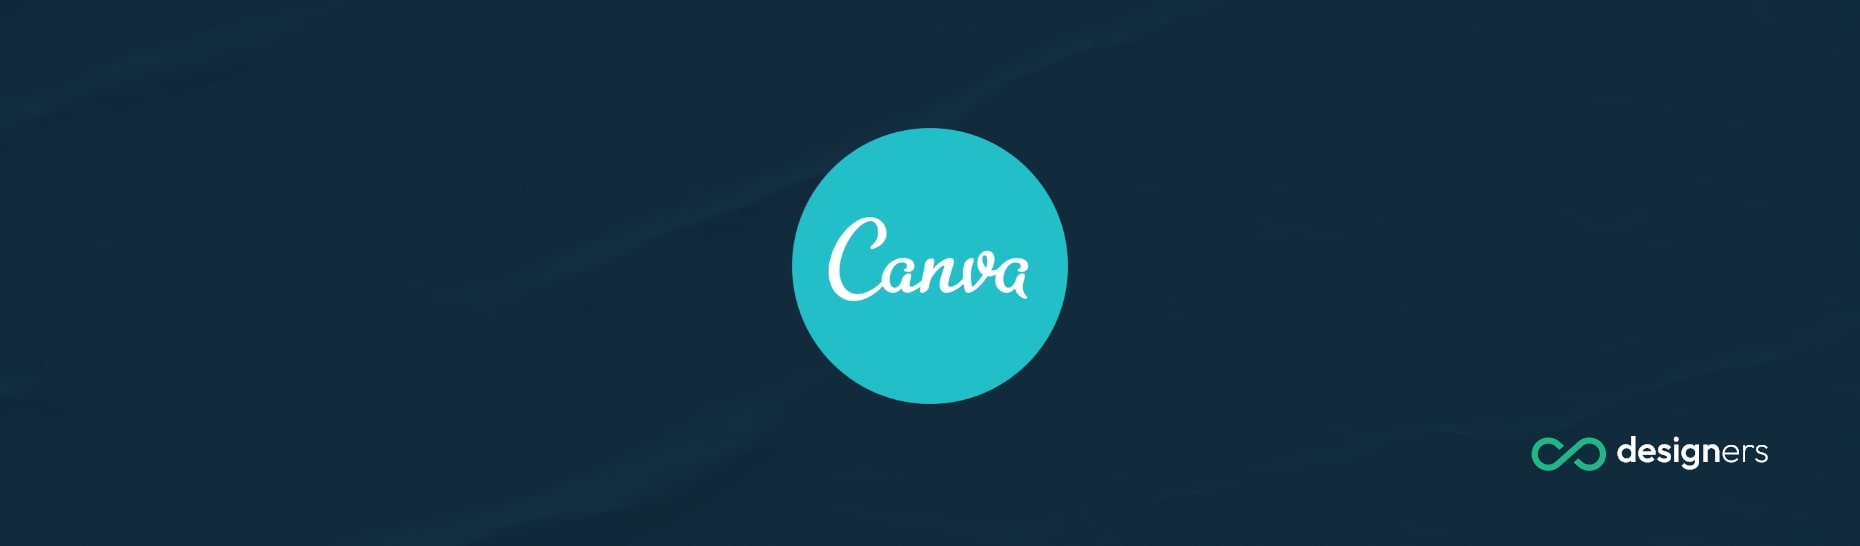 Is Canva Going to Go Public?